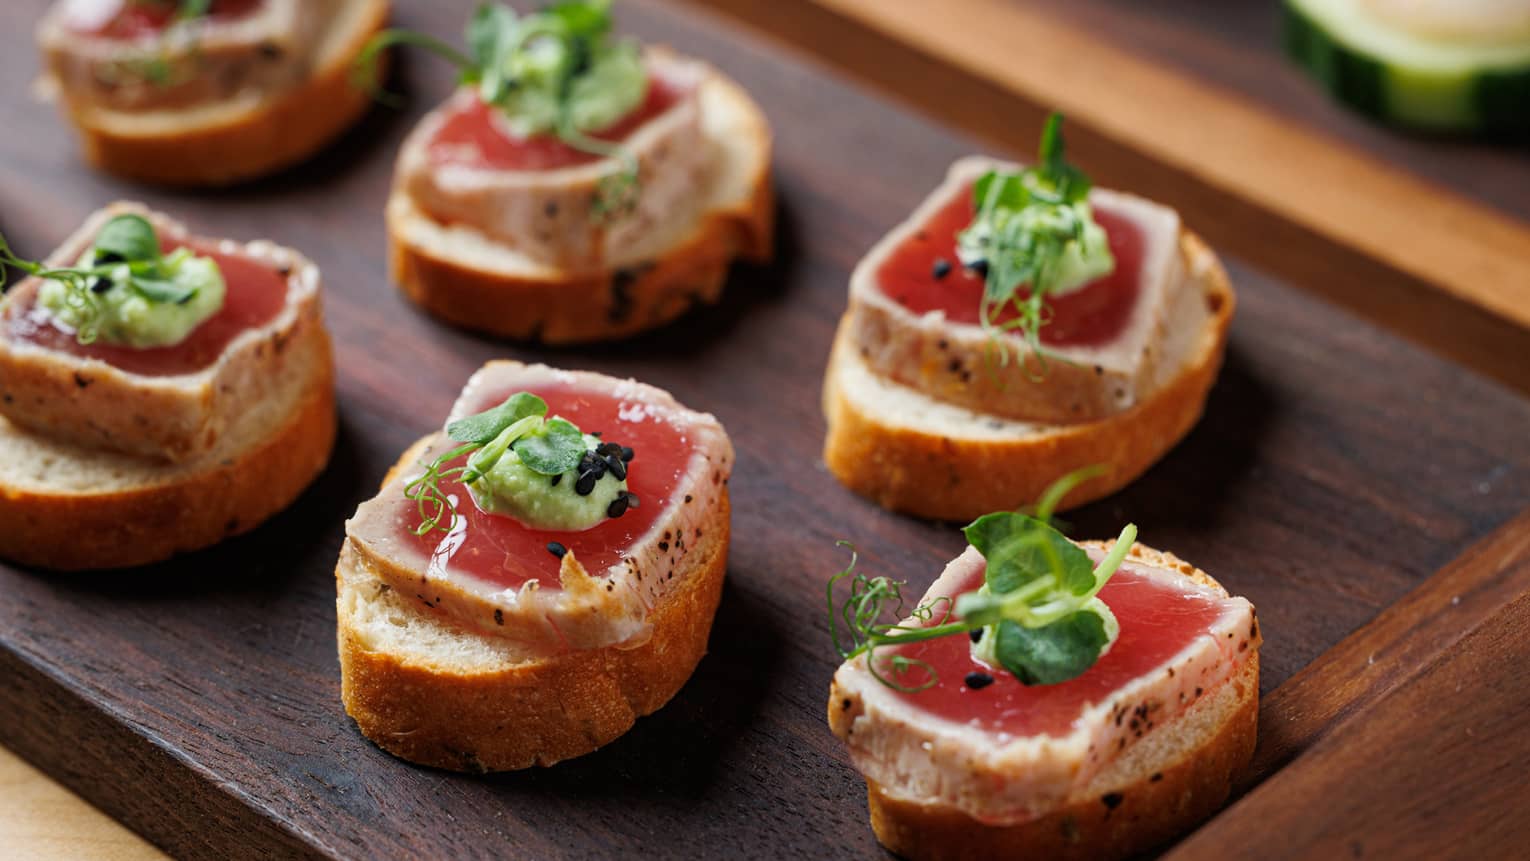 Ahi tuna squares on bruschetta dotted with wasabi on wood tray